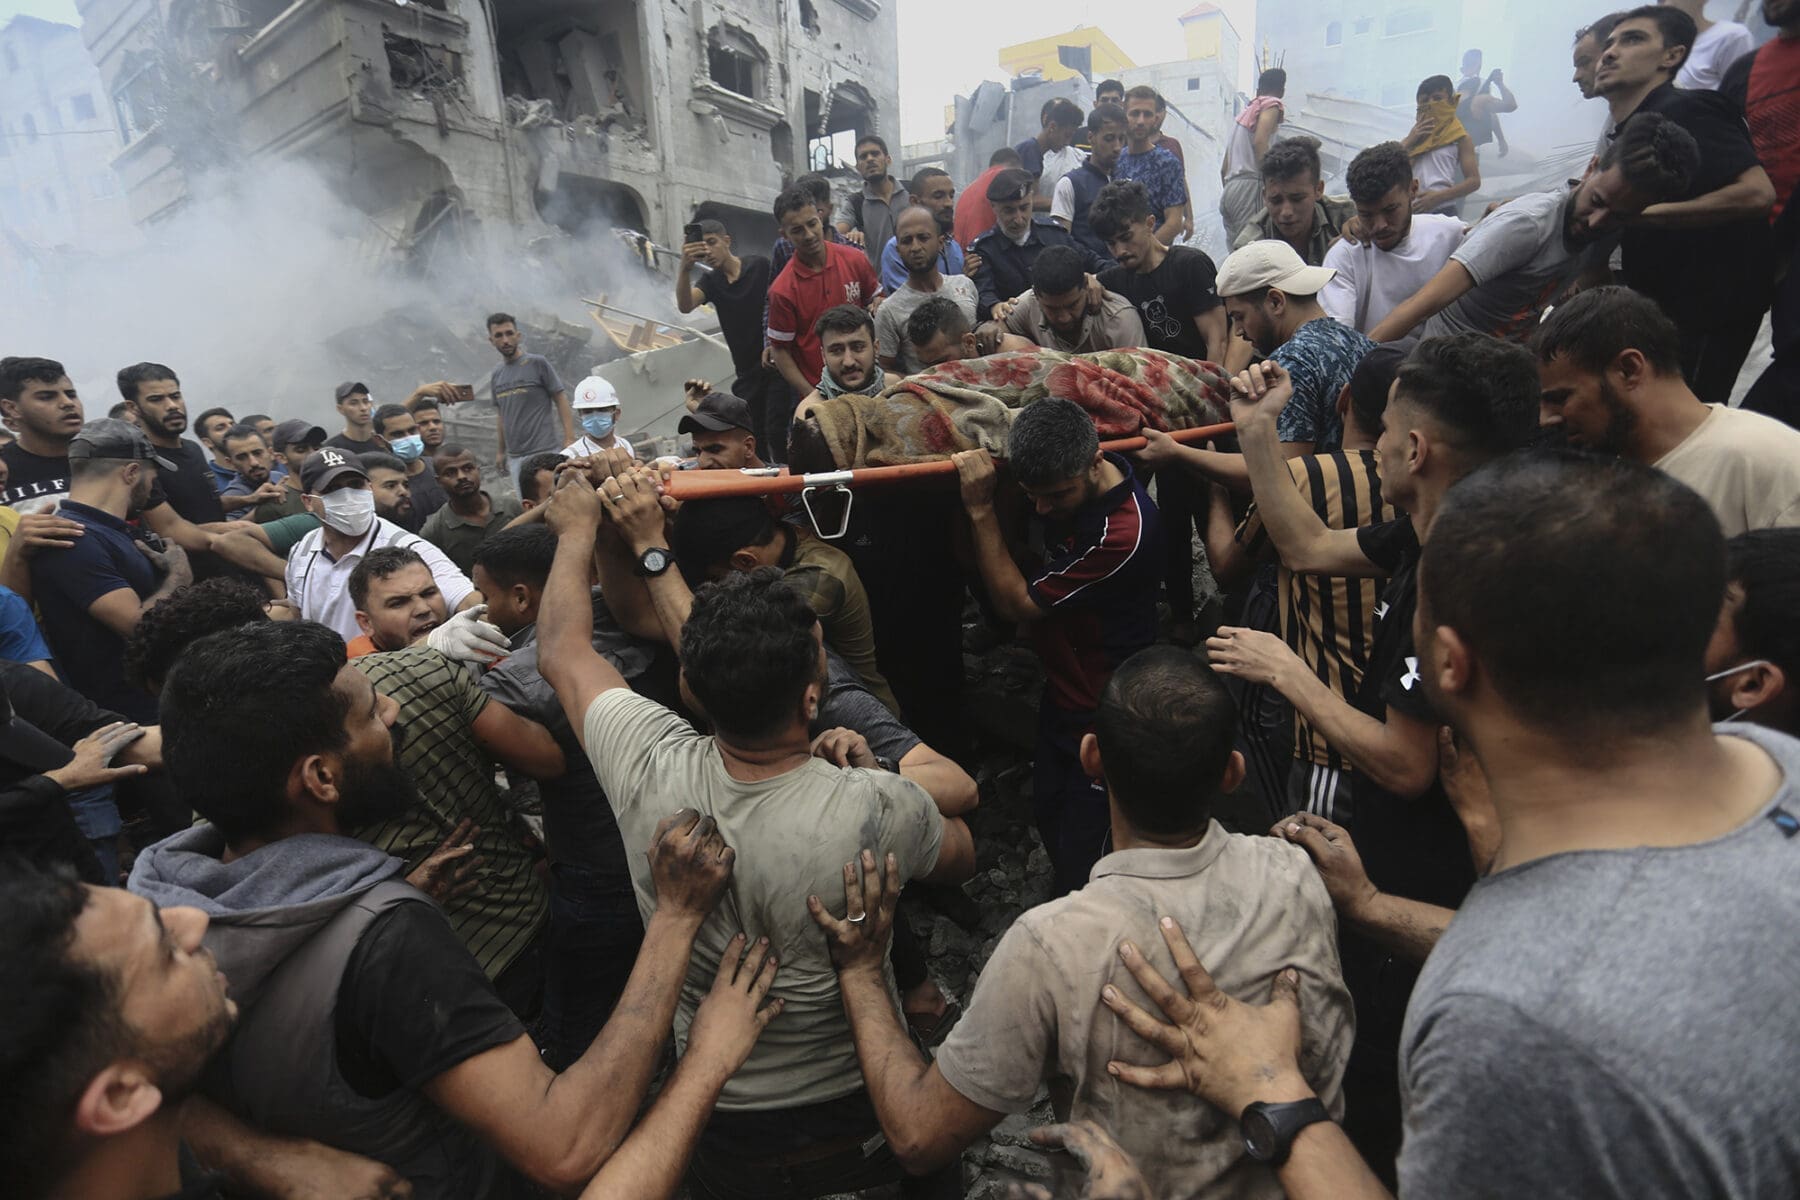 Palestinians remove a dead body from the rubble of a building after an Israeli airstrike - Source: CNN